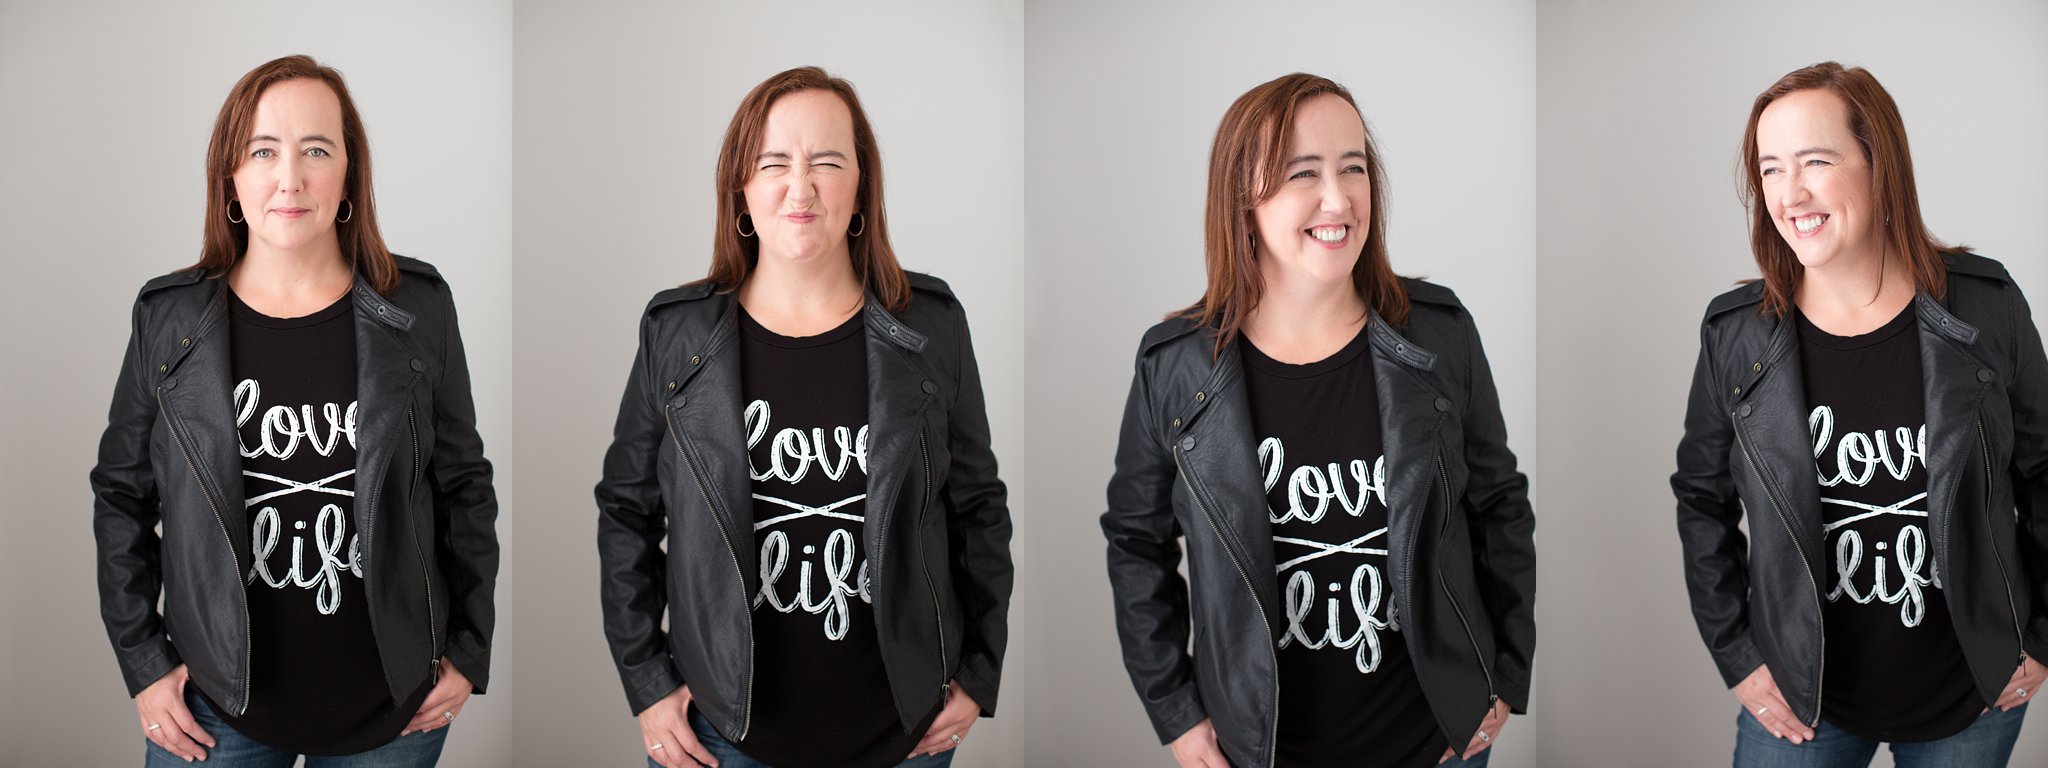 Portraits of Woman in Black Leather Jacket_0006.jpg